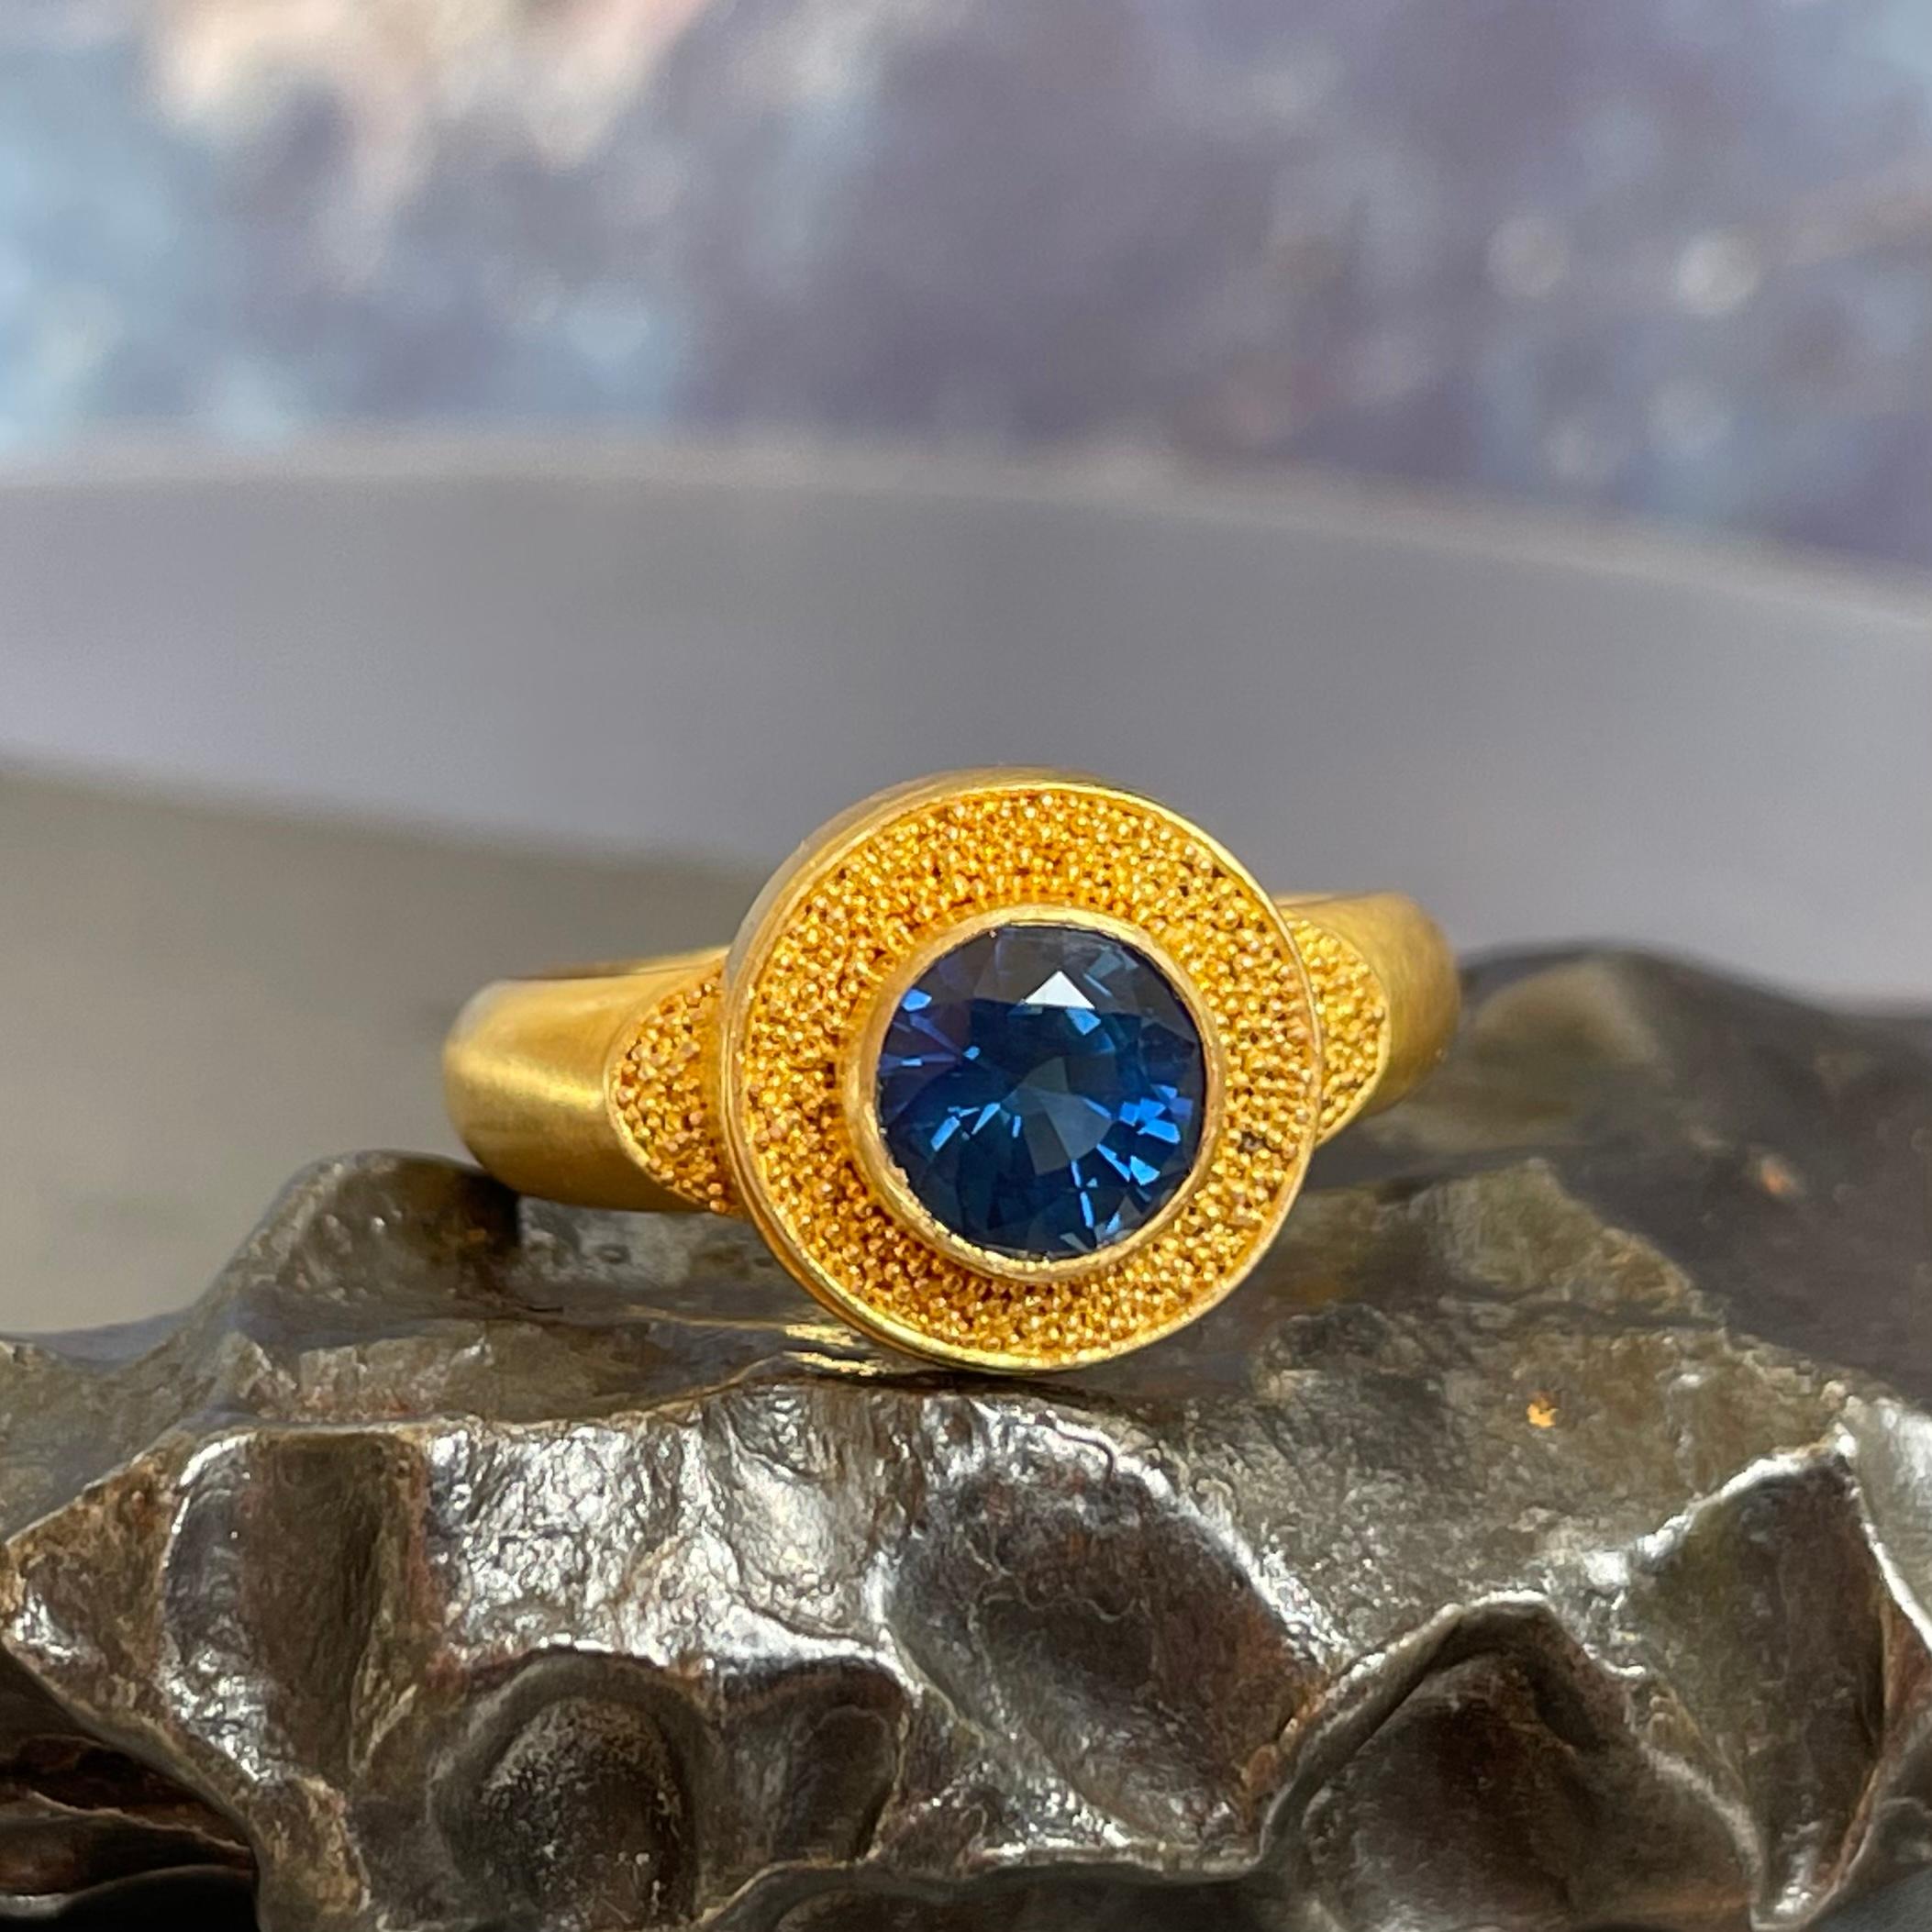 A brilliant 6 mm Sri Lankan untreated Blue Sapphire is set surrounded by fine 